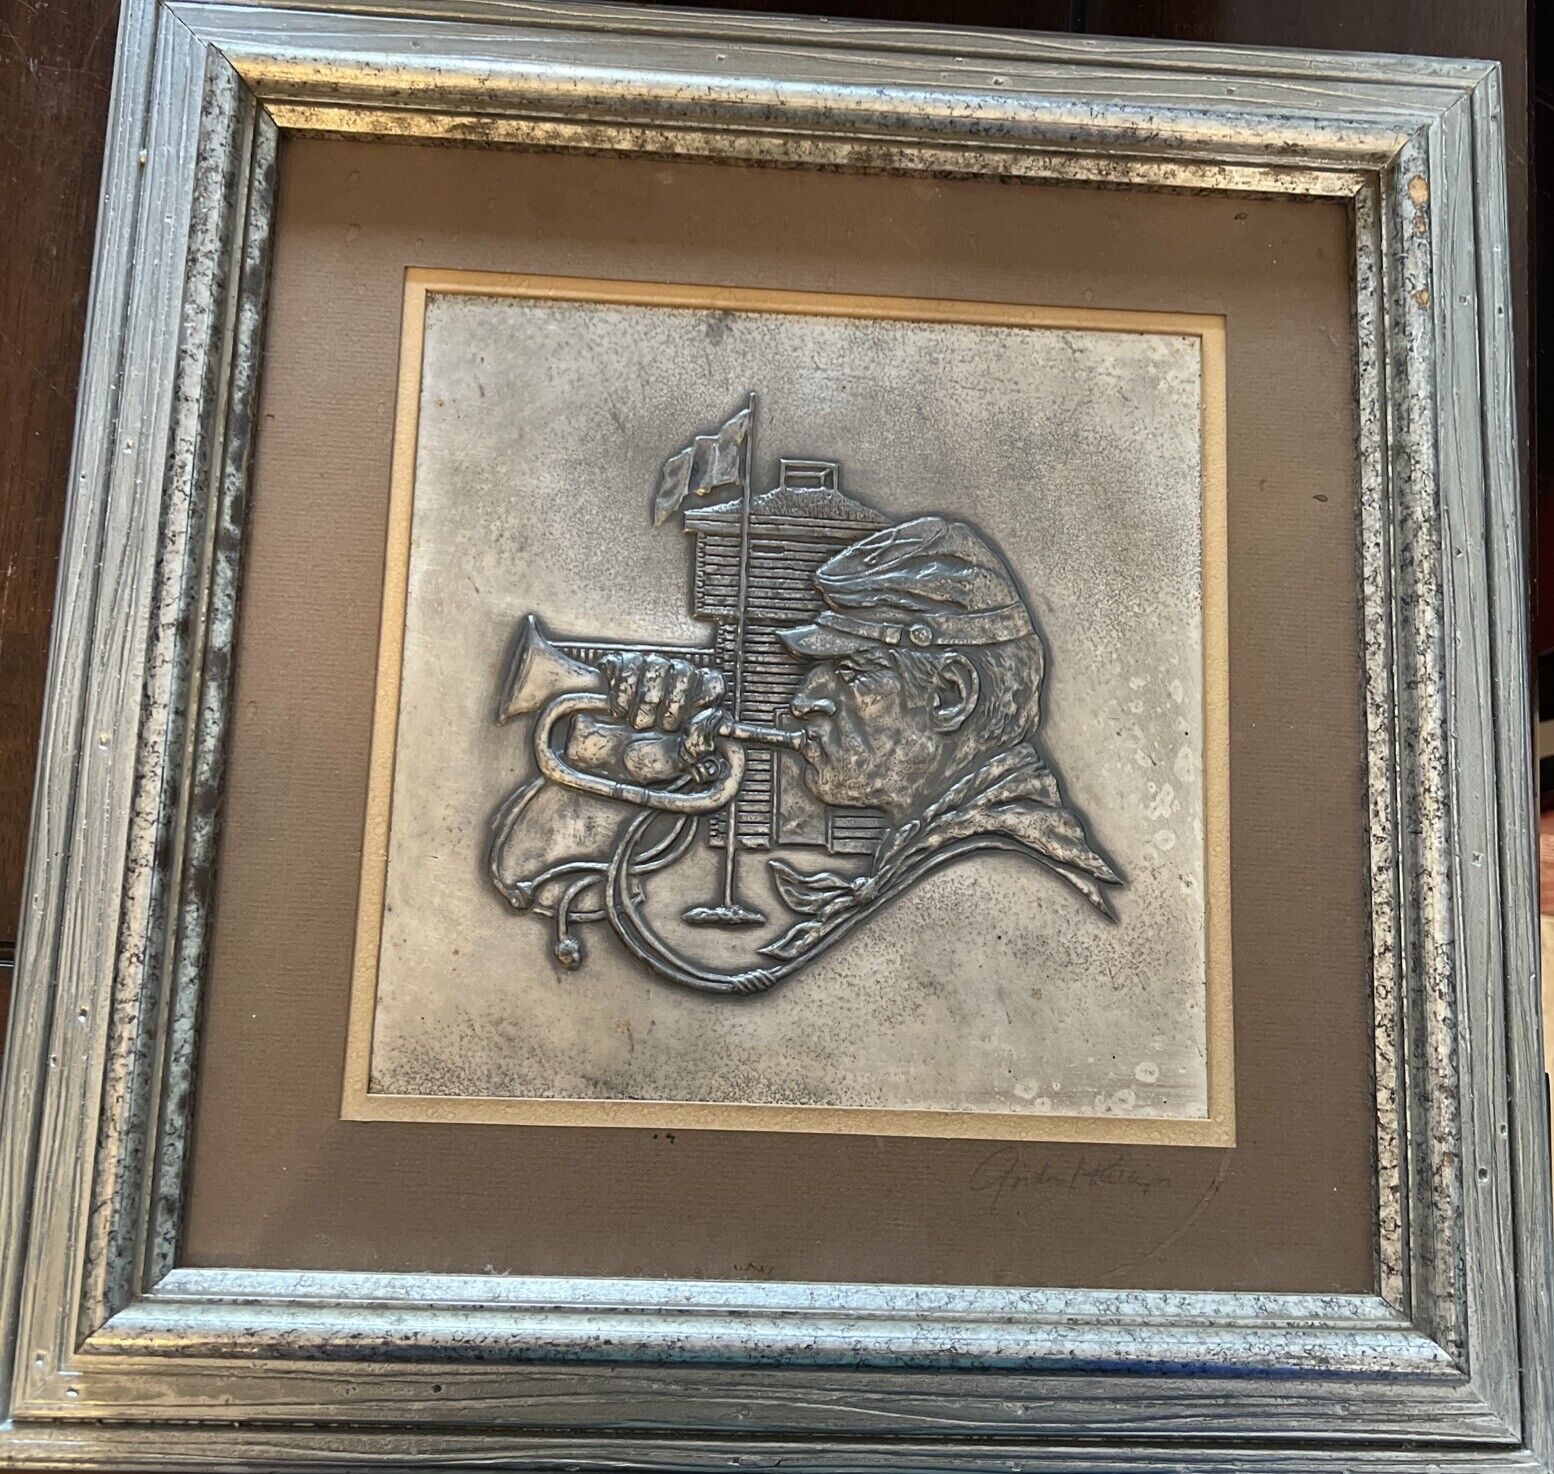 Gordon Phillips Western Silver Relief Wall Art Sculpture From “The Westerners”